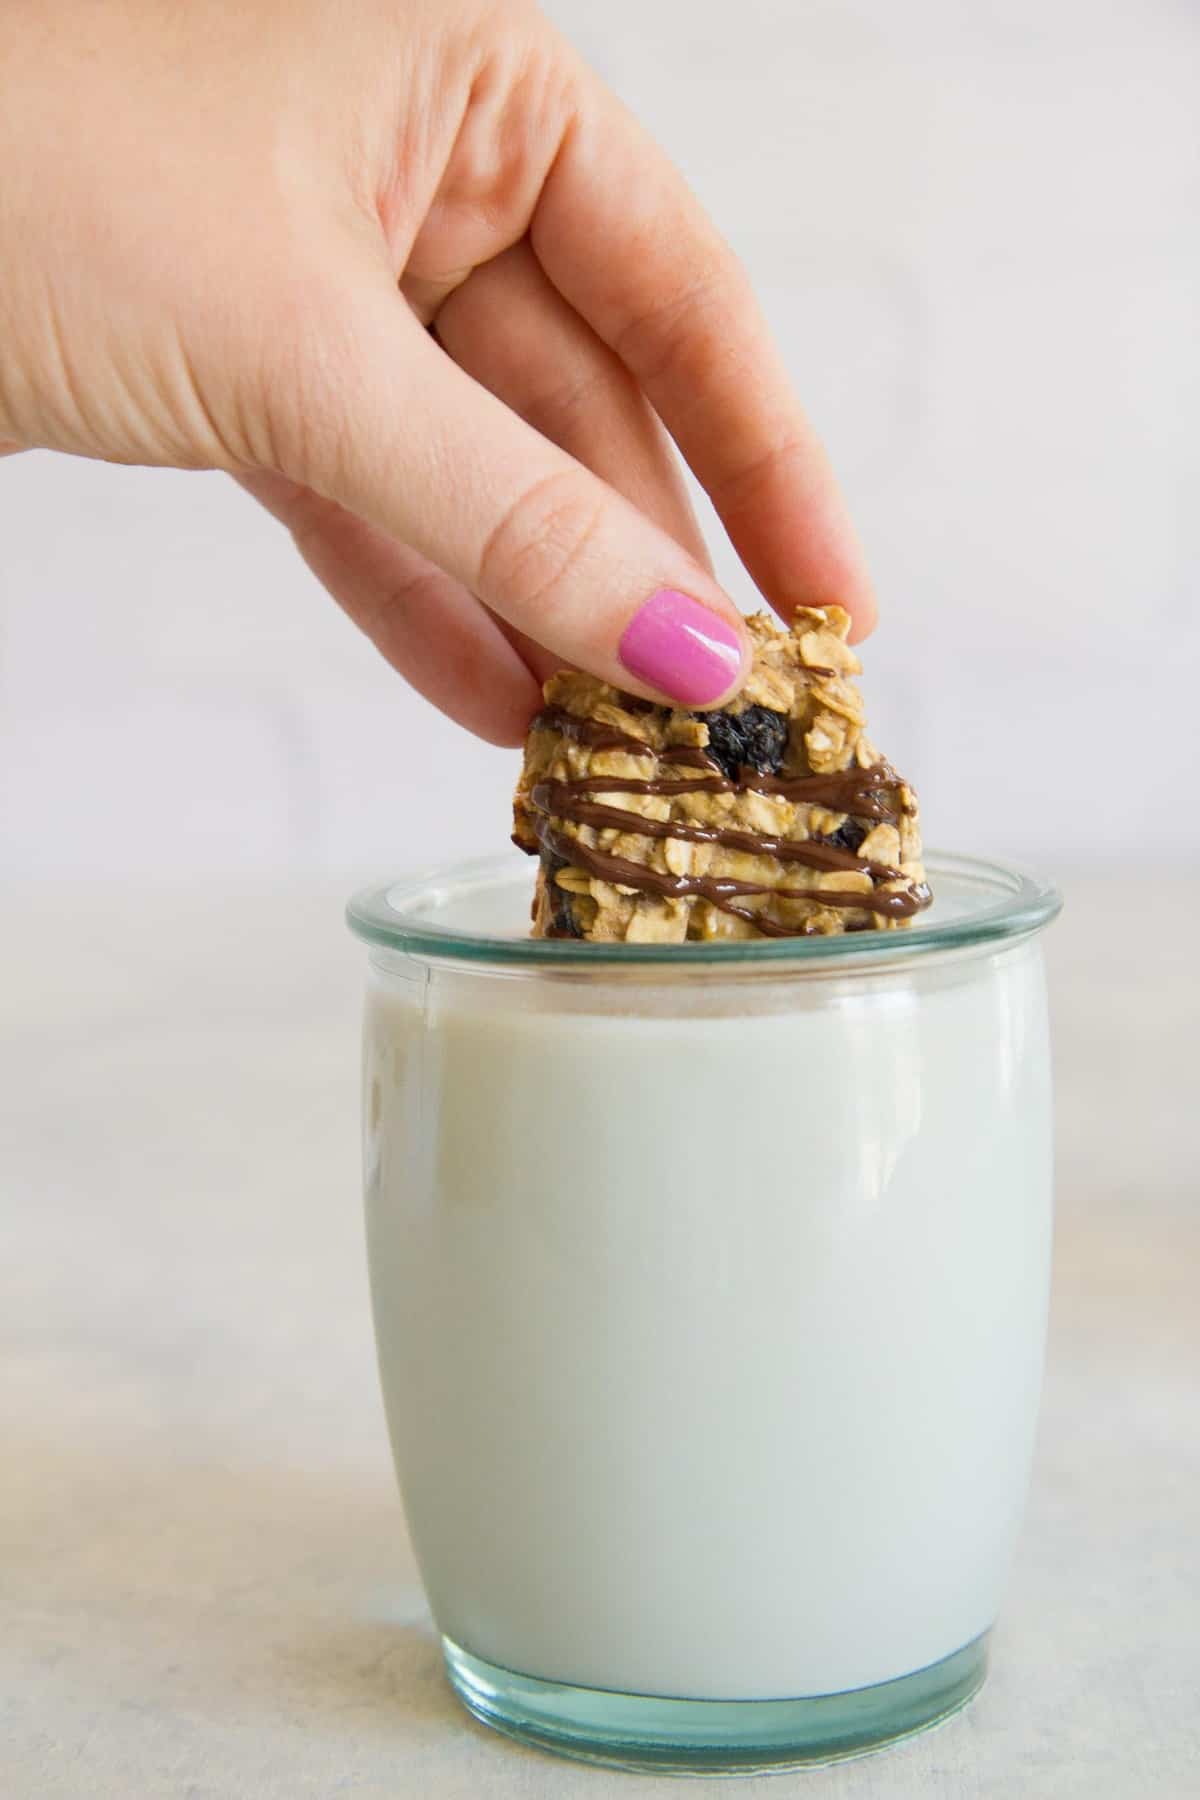 A hand dunks a chocolate drizzled cookie snack bite into a small glass of milk.